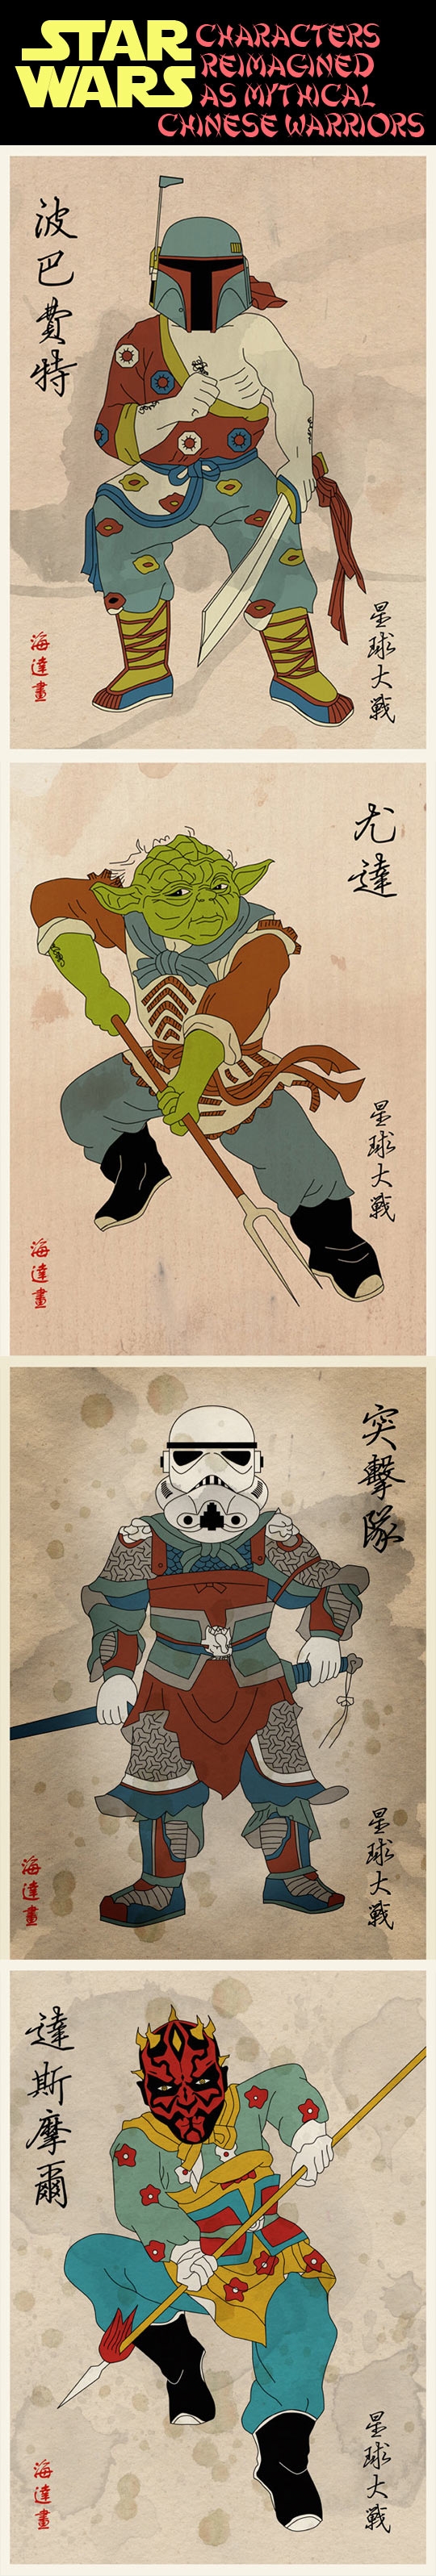 Star Wars characters reimagined.